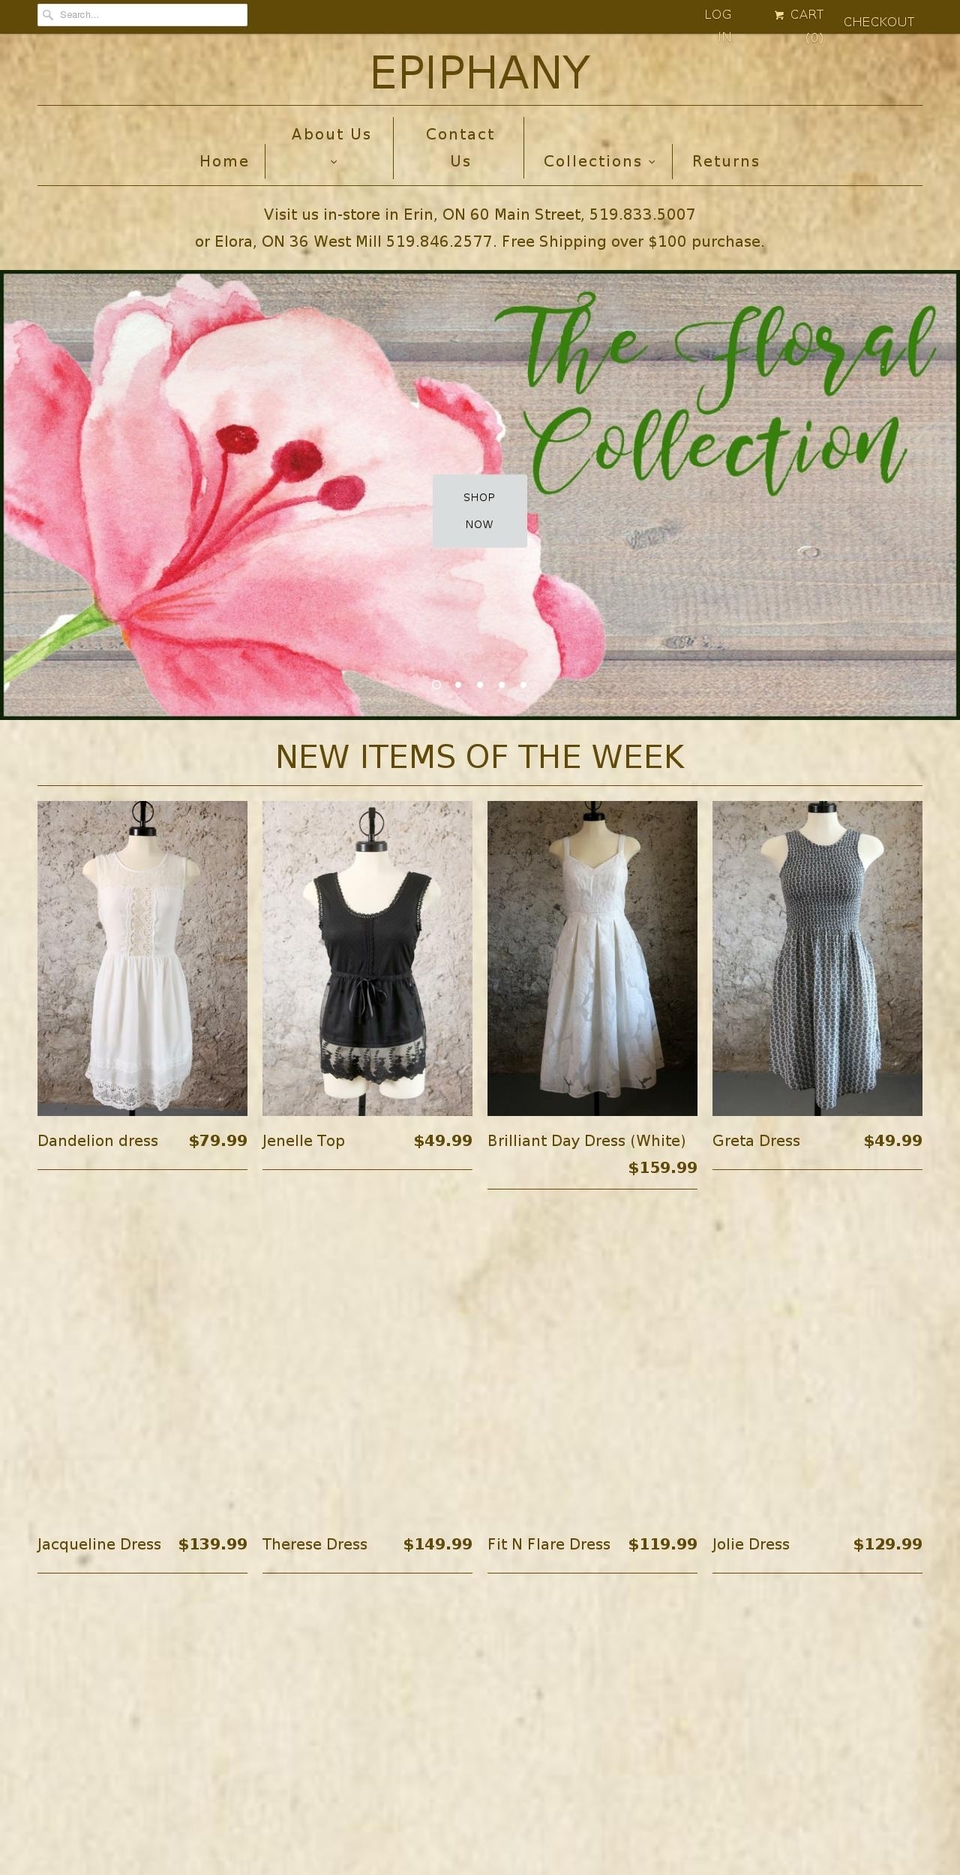 OOTS Support Shopify theme site example shopepiphanyapparel.ca